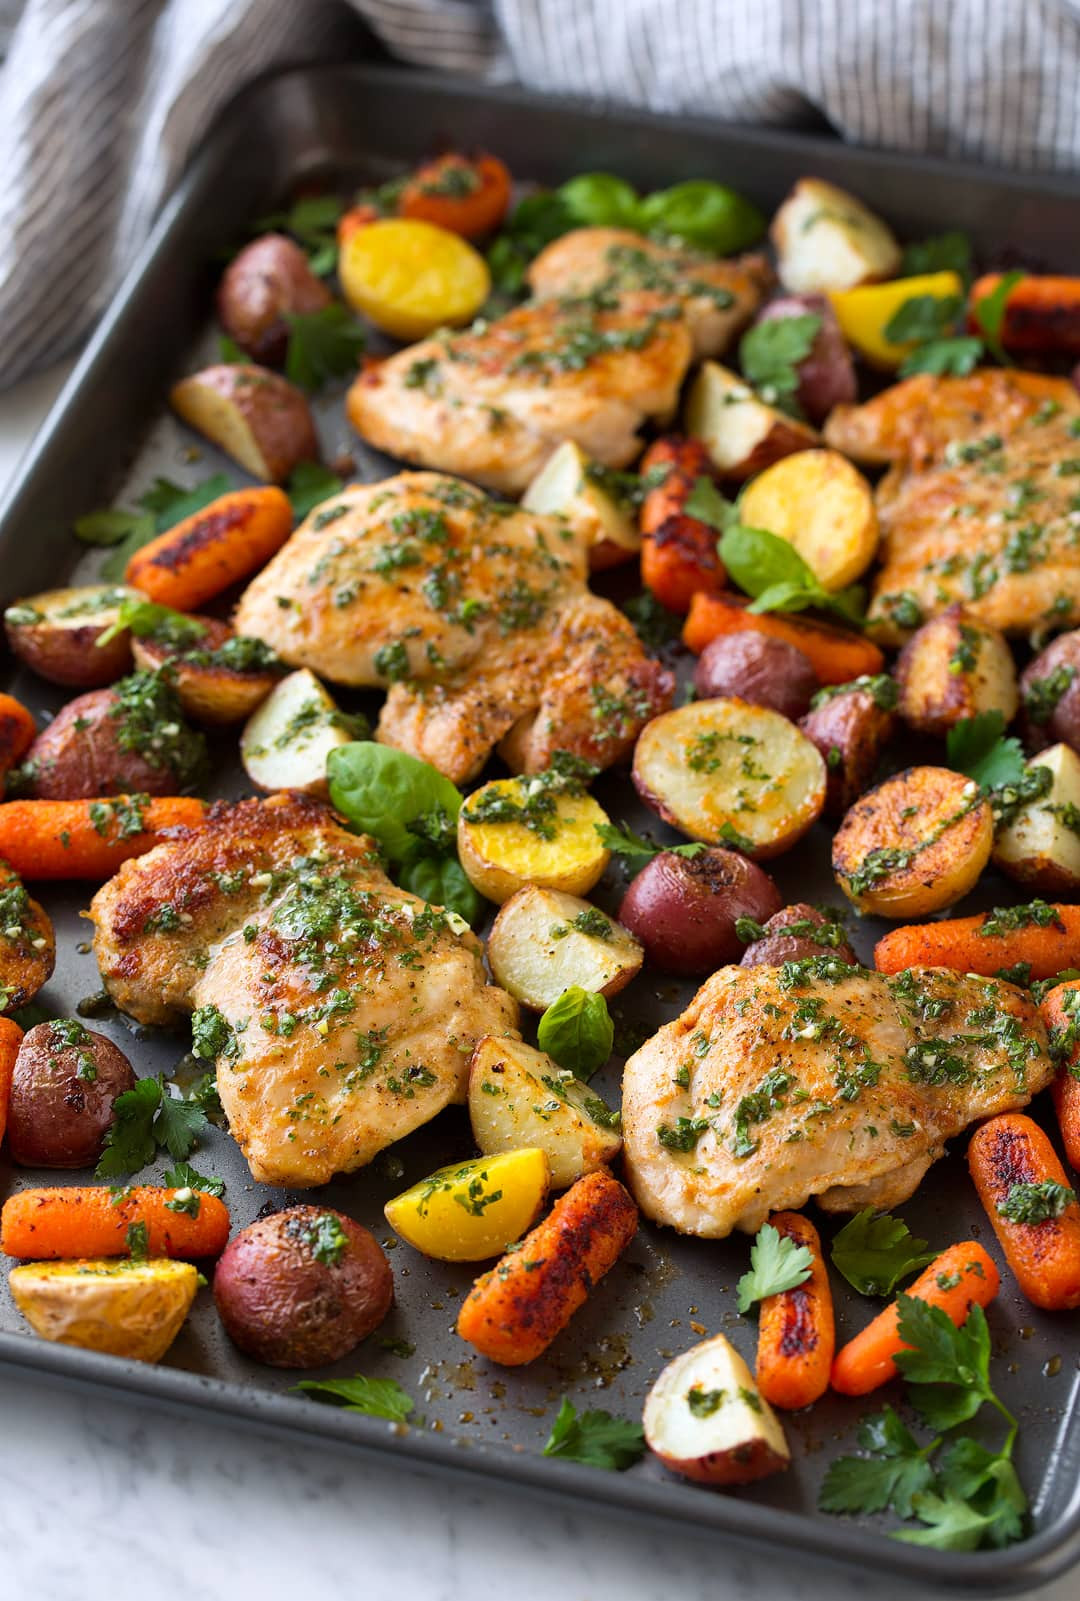 25 Ideas for Oven Roasted Chicken Breast and Vegetables - Home, Family ...